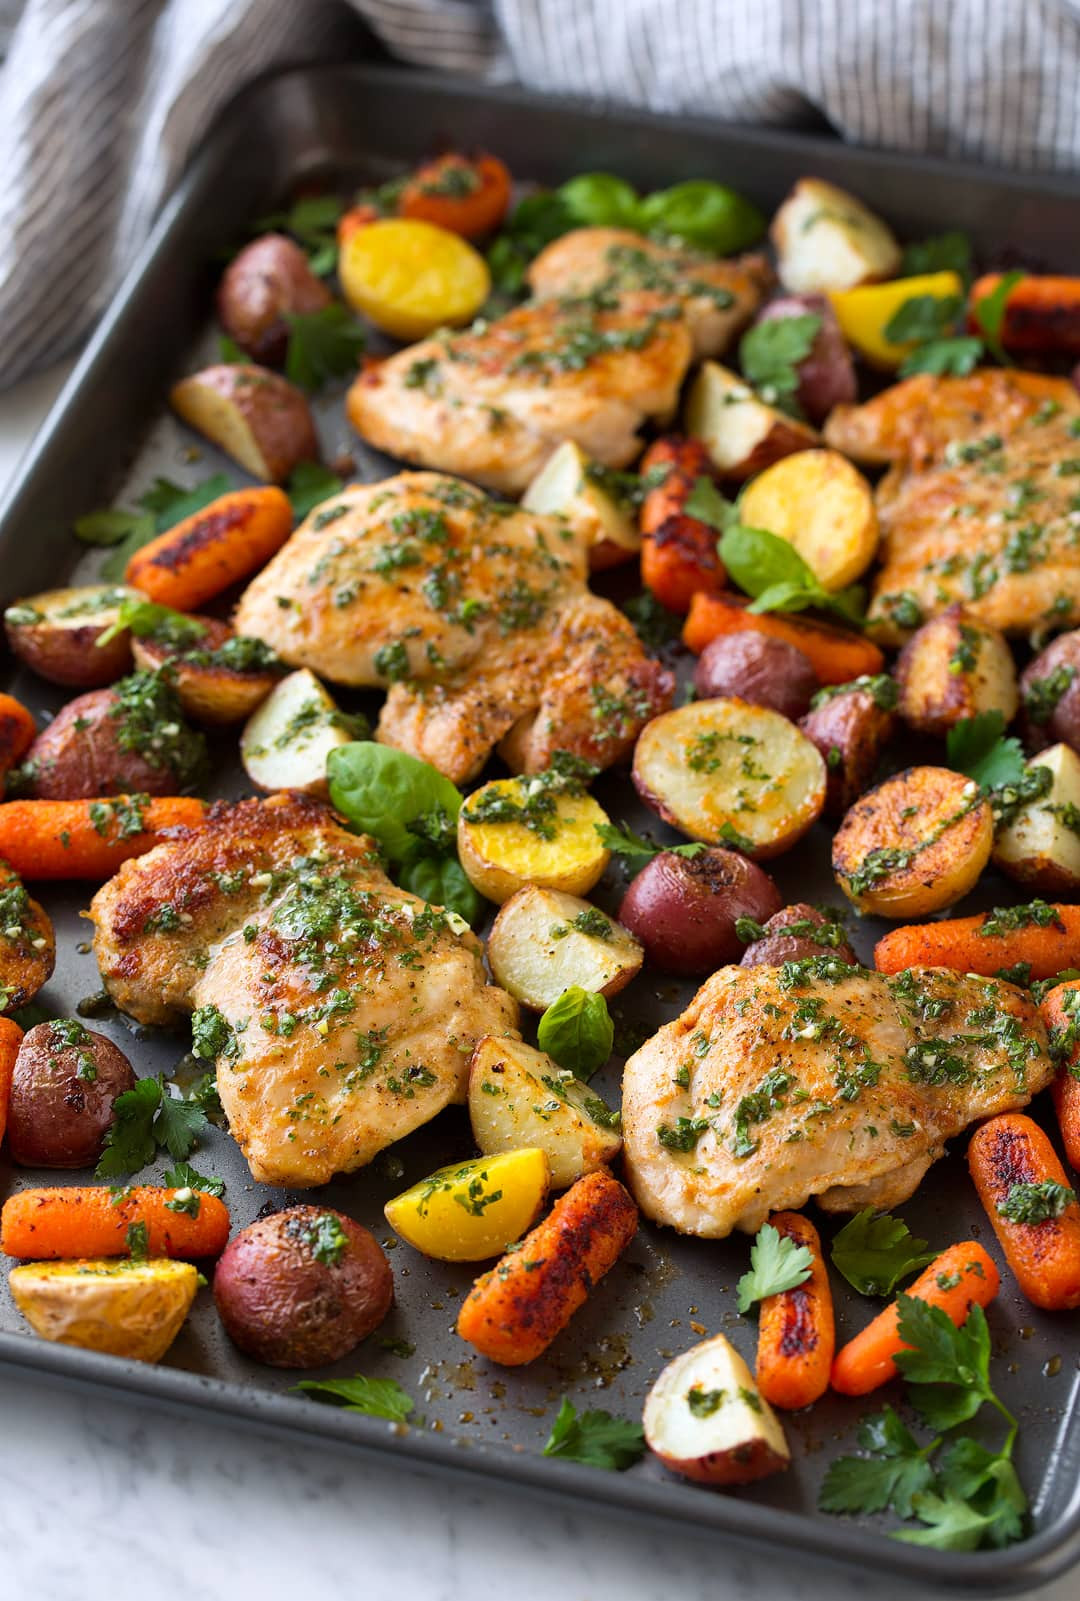 25 Ideas for Oven Roasted Chicken Breast and Vegetables - Home, Family ...